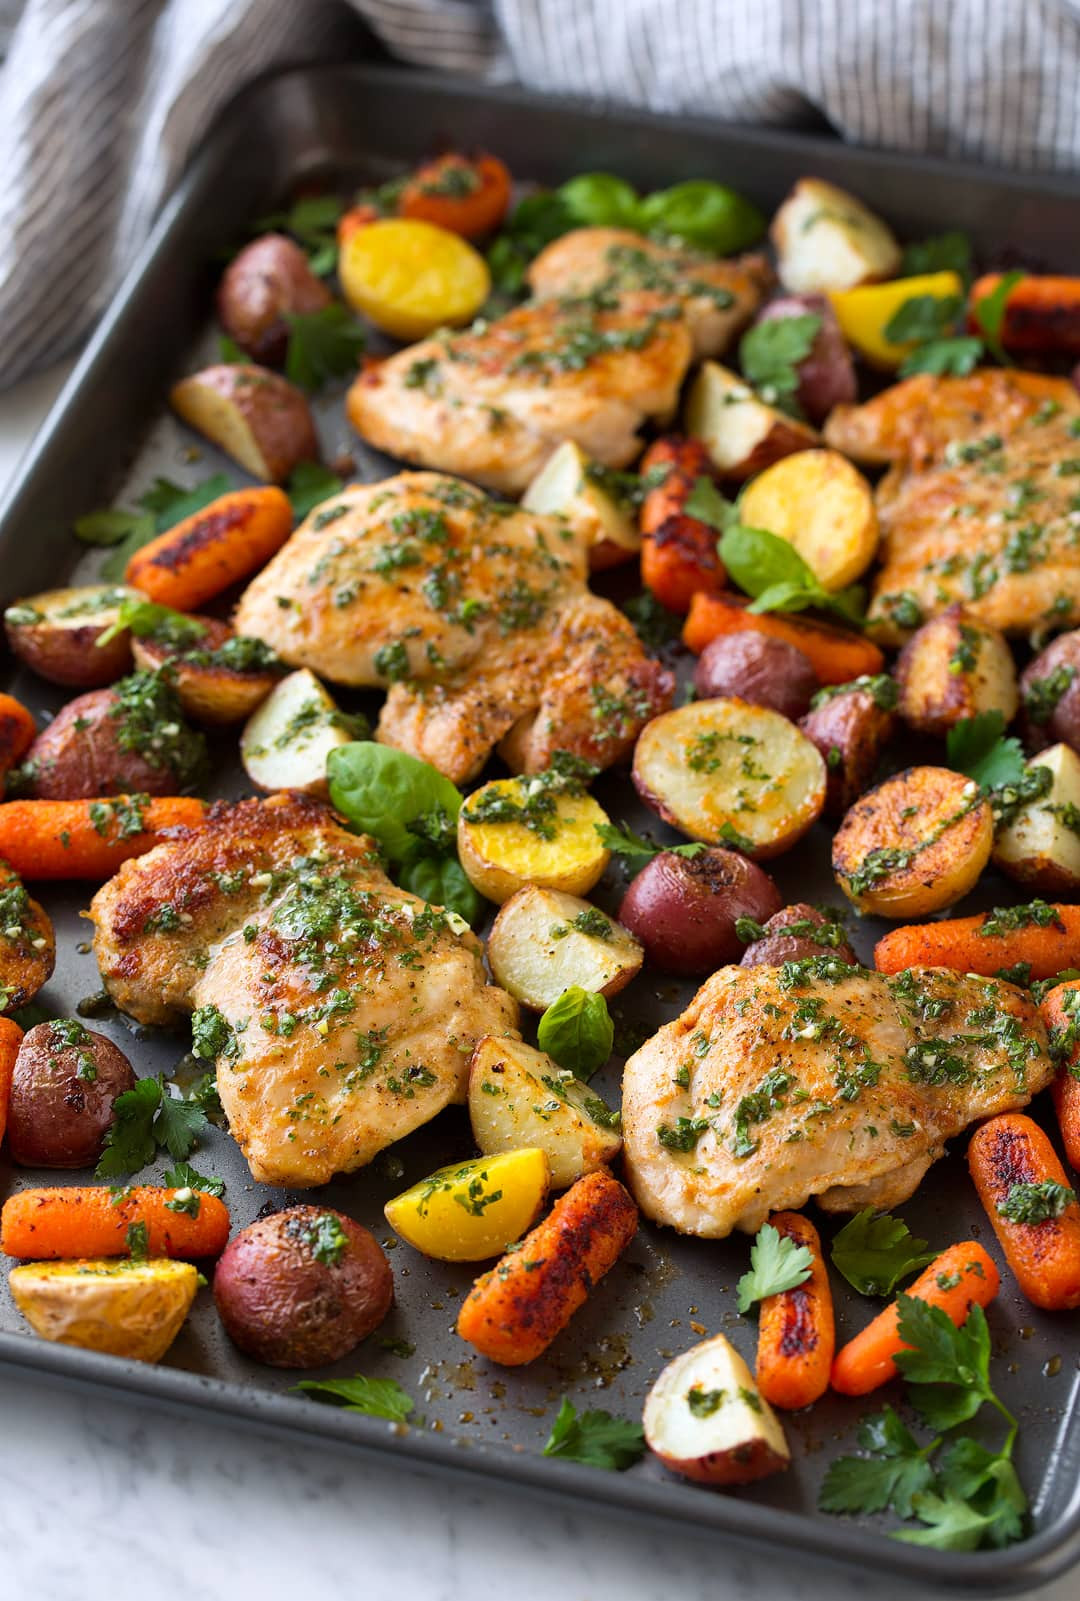 25 Ideas for Oven Roasted Chicken Breast and Vegetables - Home, Family ...